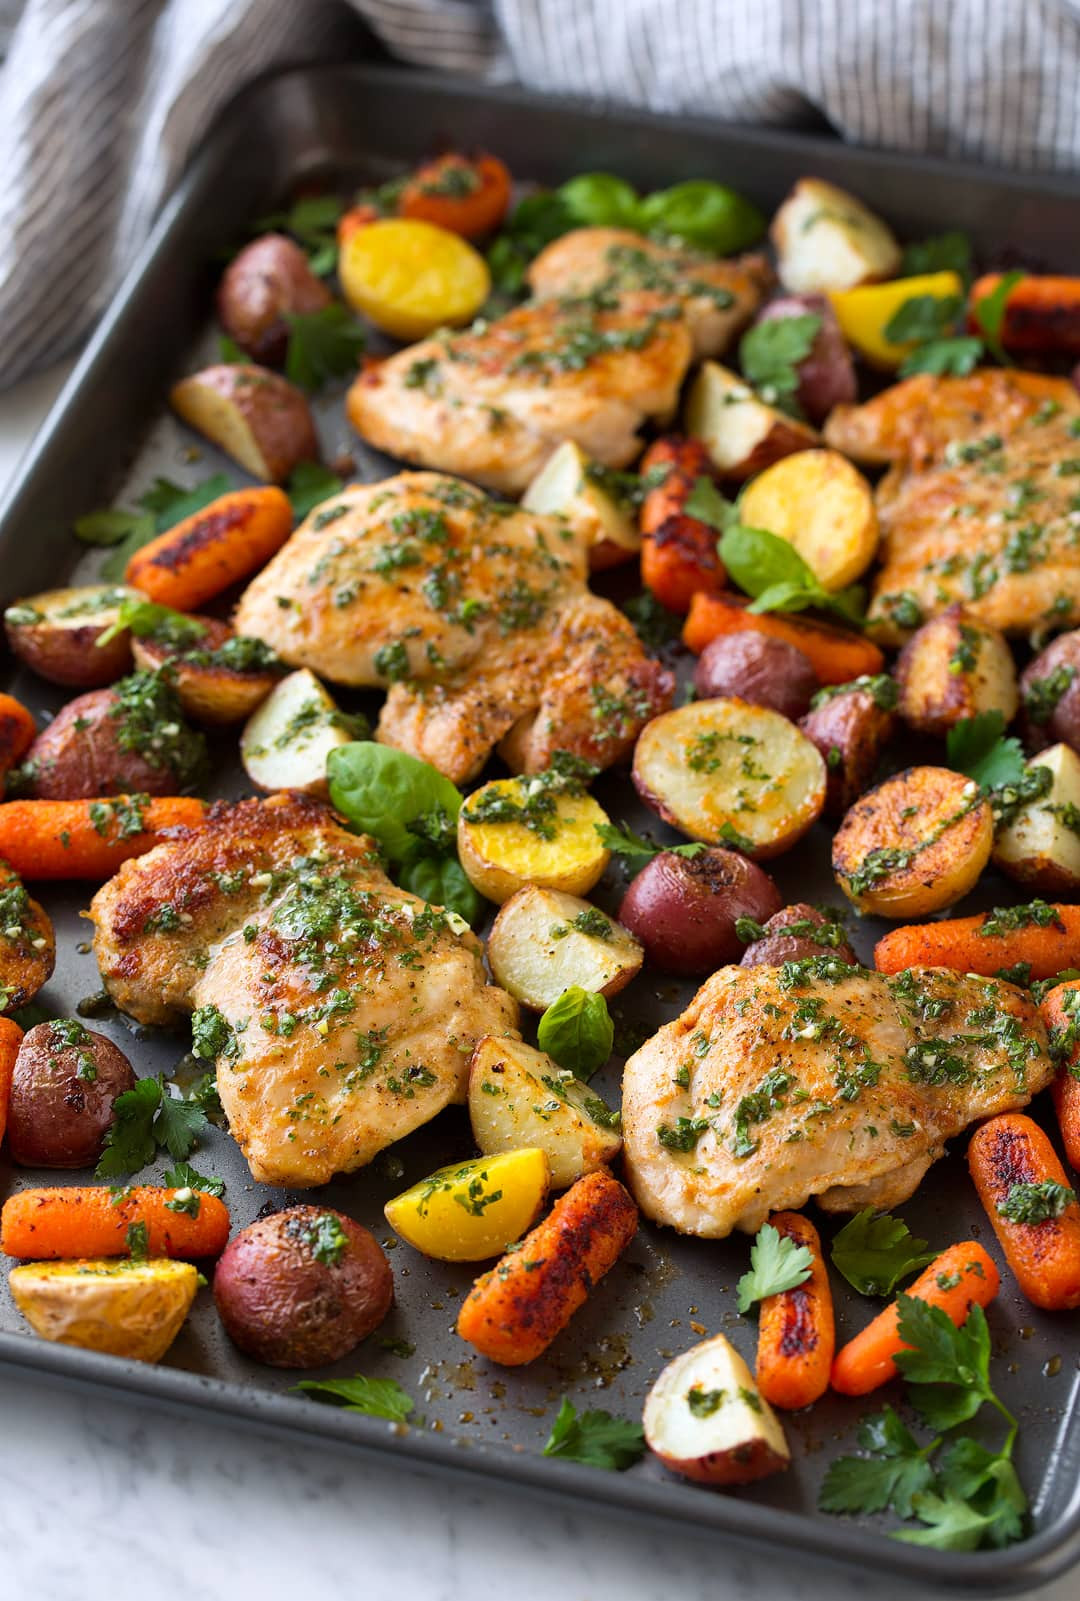 25 Ideas for Oven Roasted Chicken Breast and Vegetables - Home, Family ...